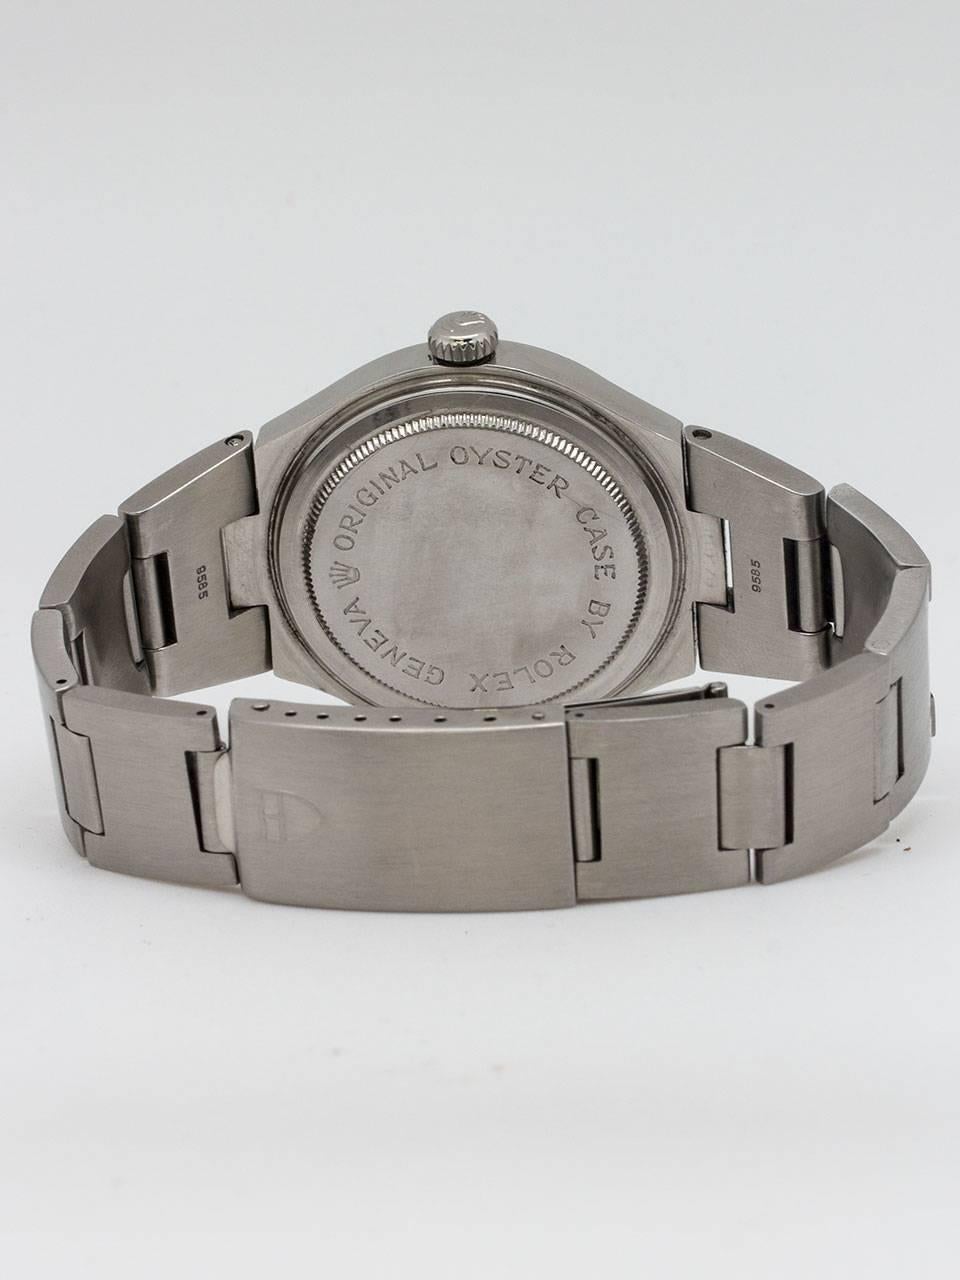 Tudor Stainless Steel Prince Oysterdate Wristwatch Ref 9101/0  In Excellent Condition For Sale In West Hollywood, CA